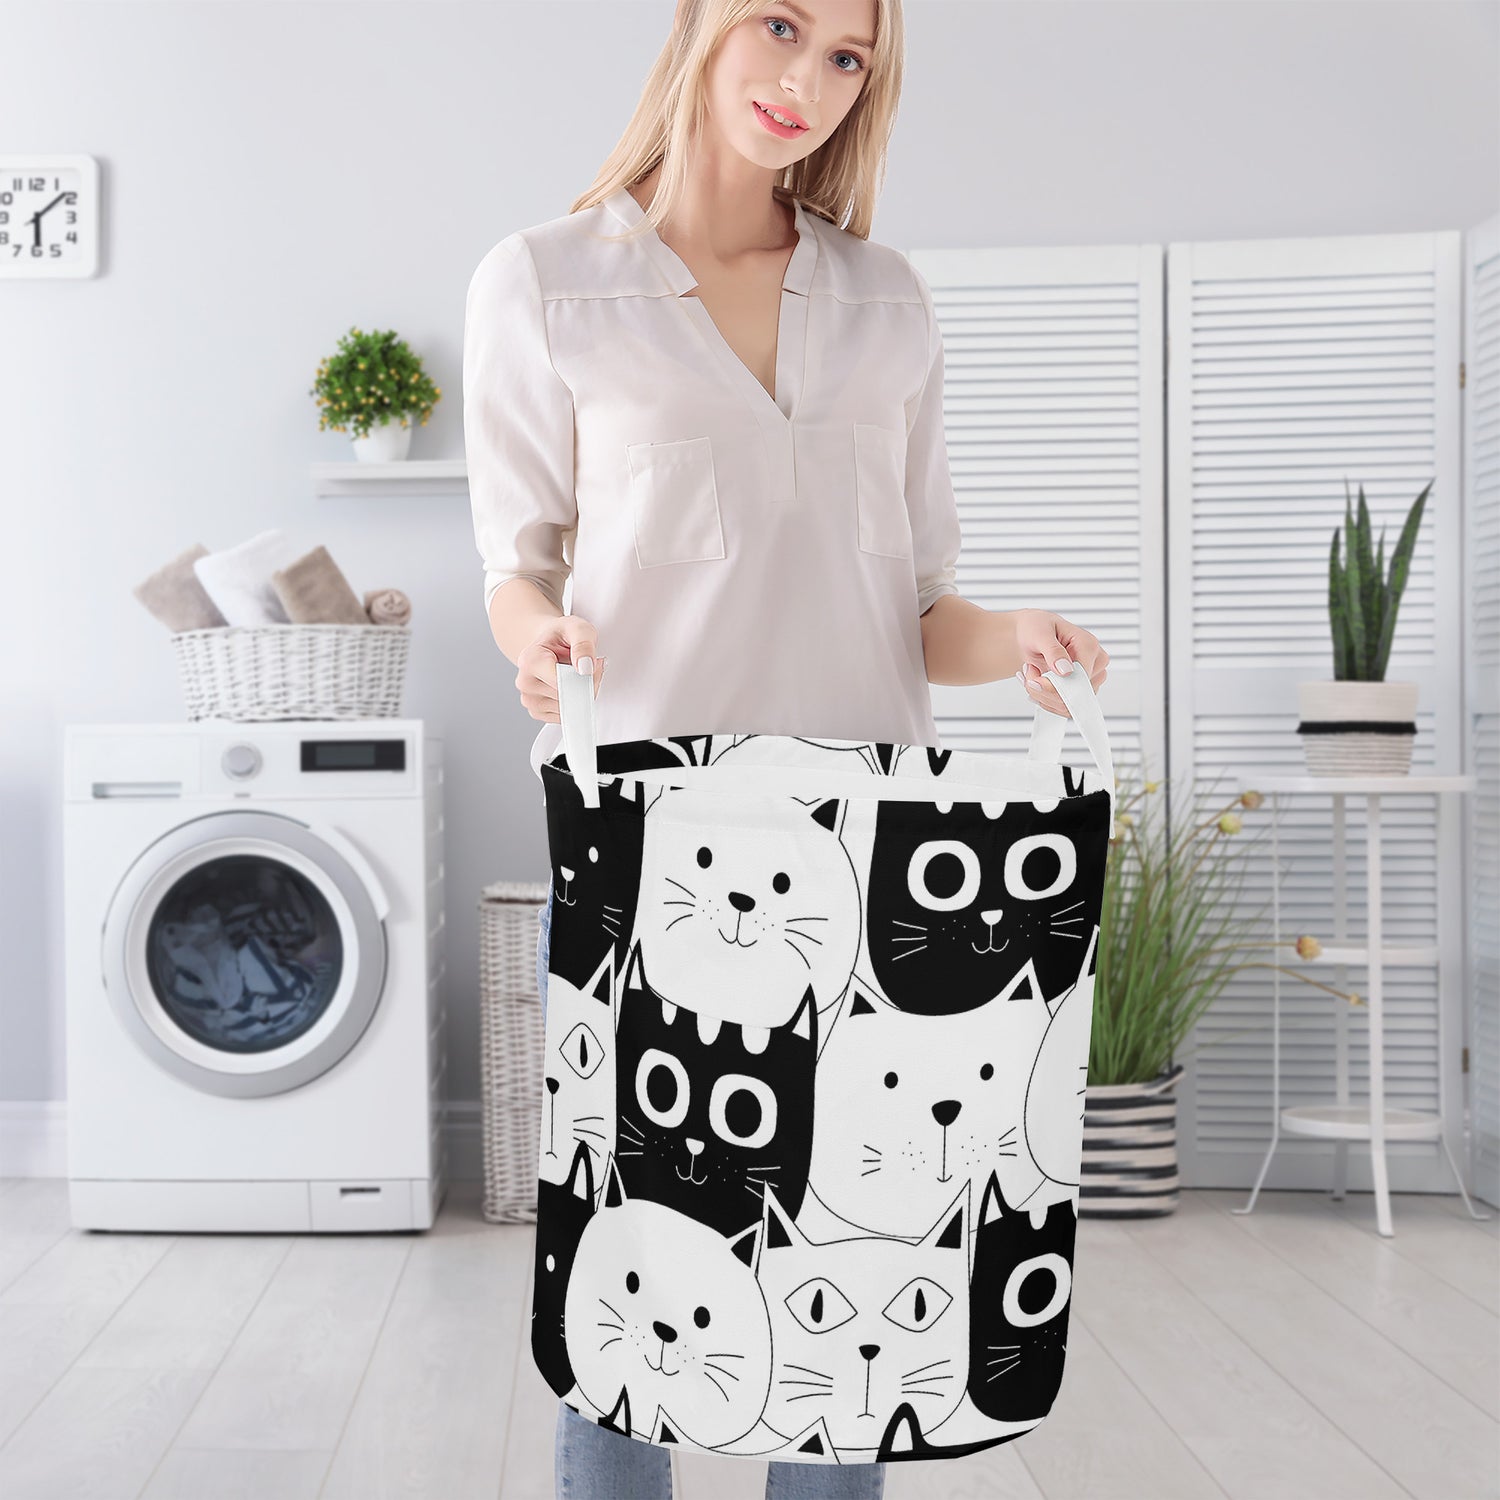 Round Laundry Basket Cats Black White Home-clothes-jewelry